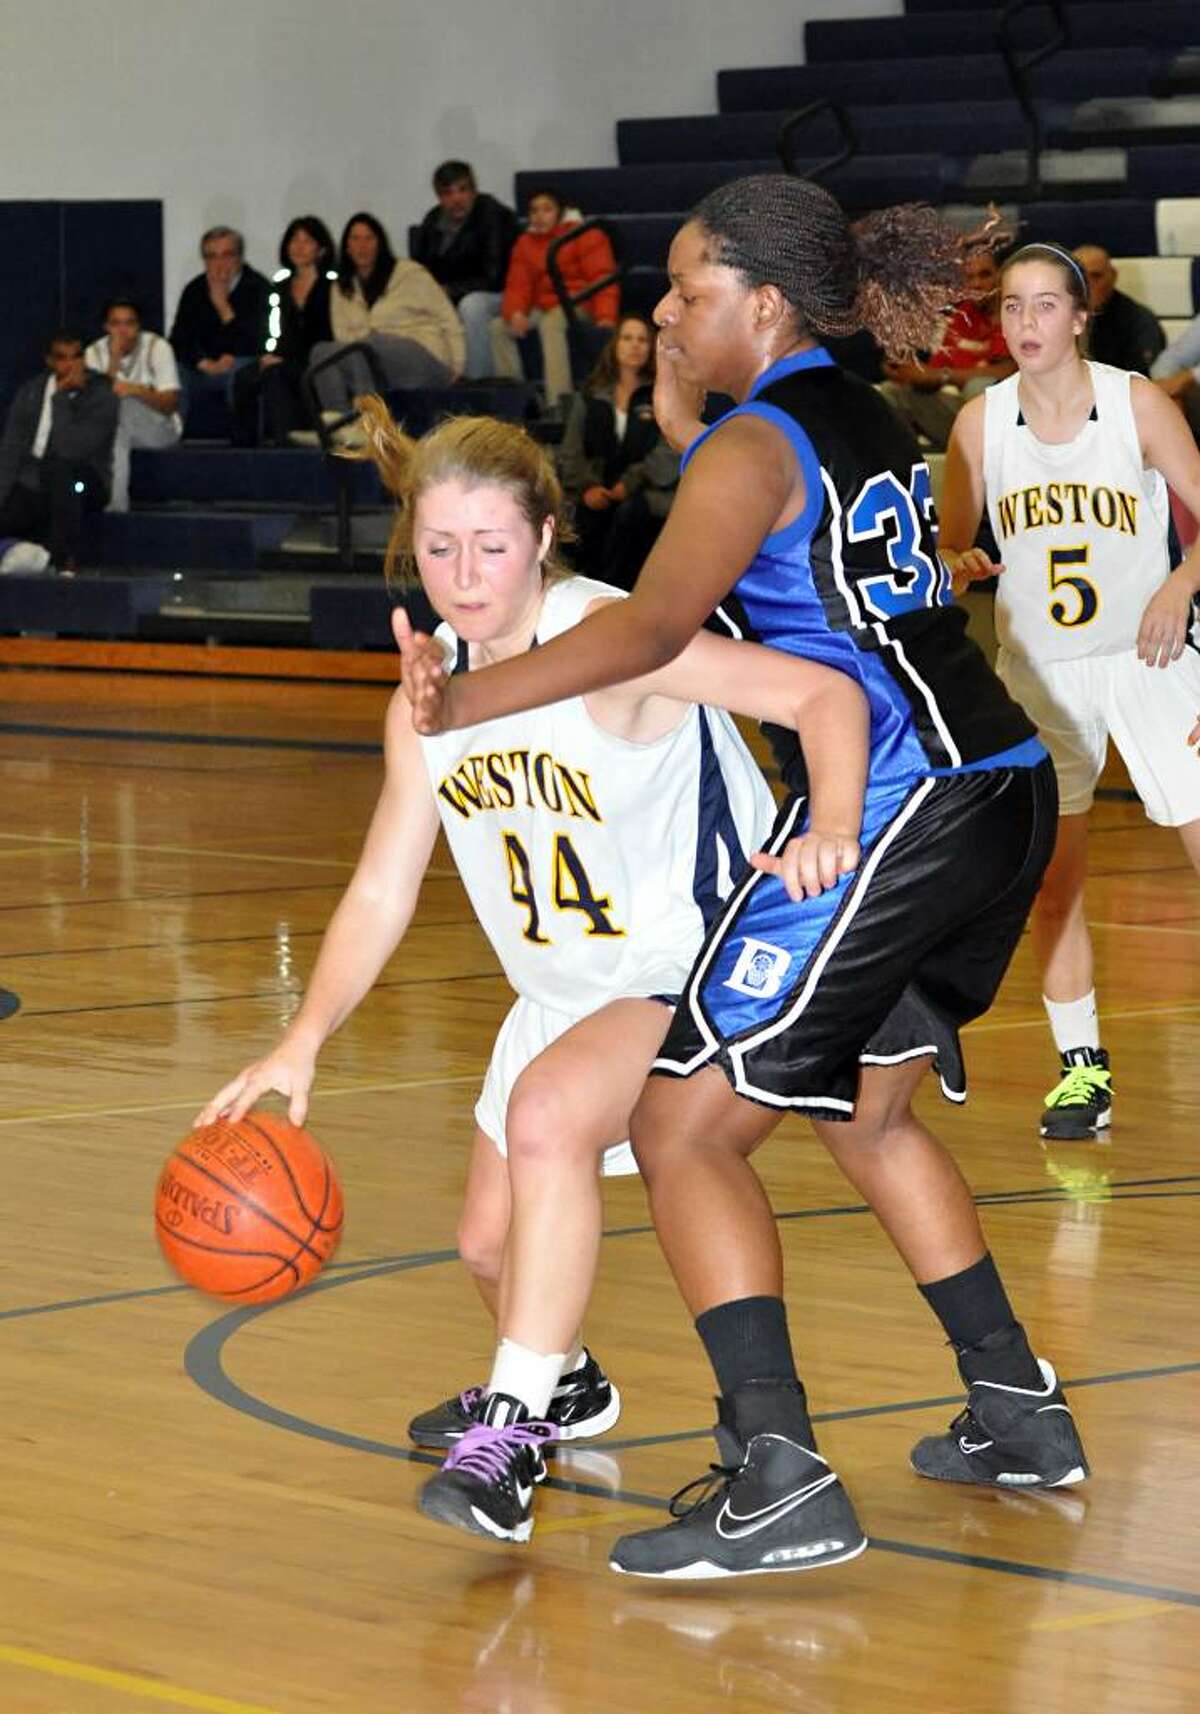 Weston's Brittany Swanson dribbles past Bunnell's Ishede Milfort during Tuesday's game at Weston.